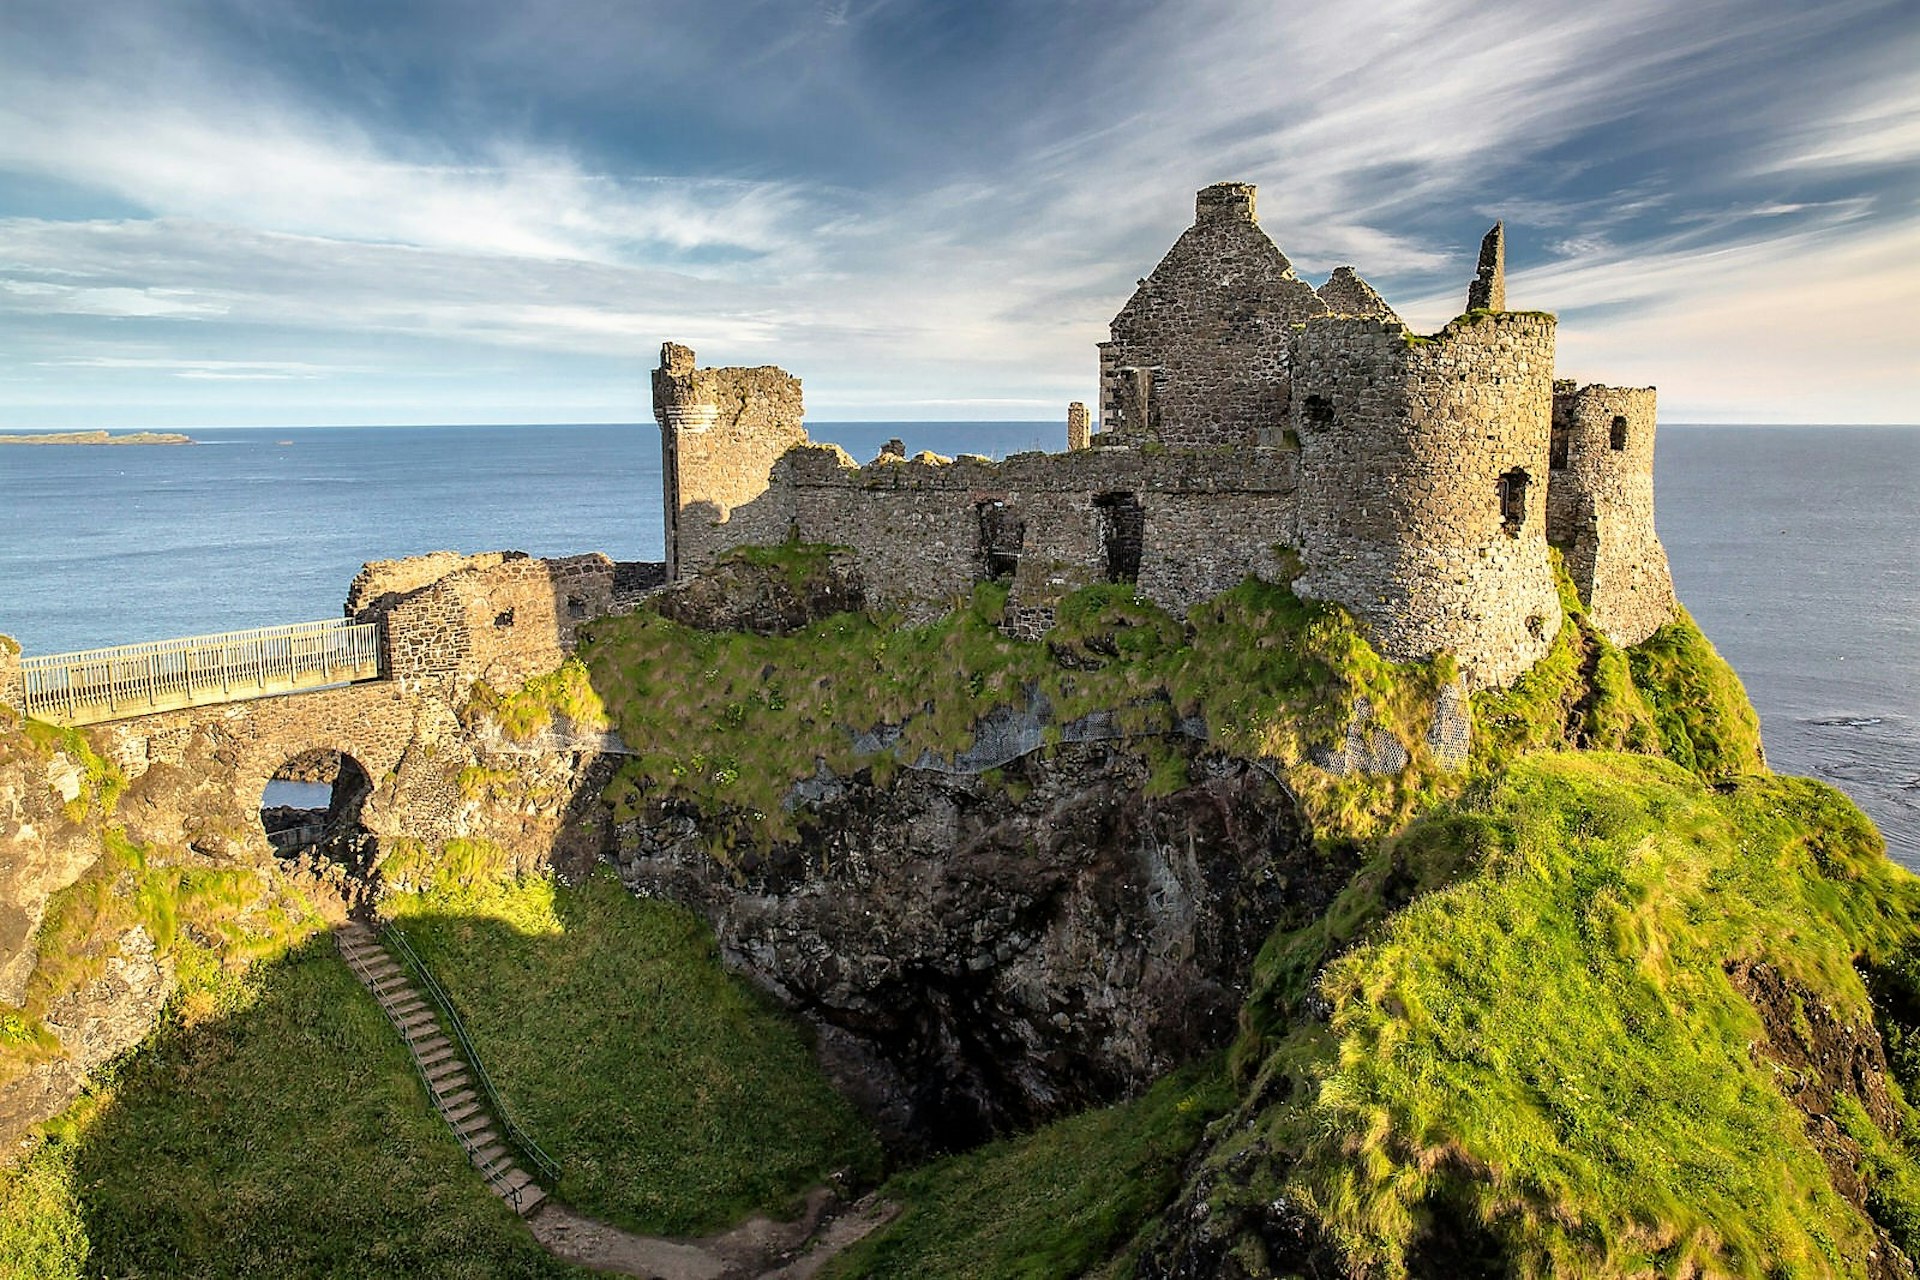 Brooding, ruined Dunluce Castle is a highlight of the Causeway Coast © Rainbow79 / Getty Images / iStockphoto